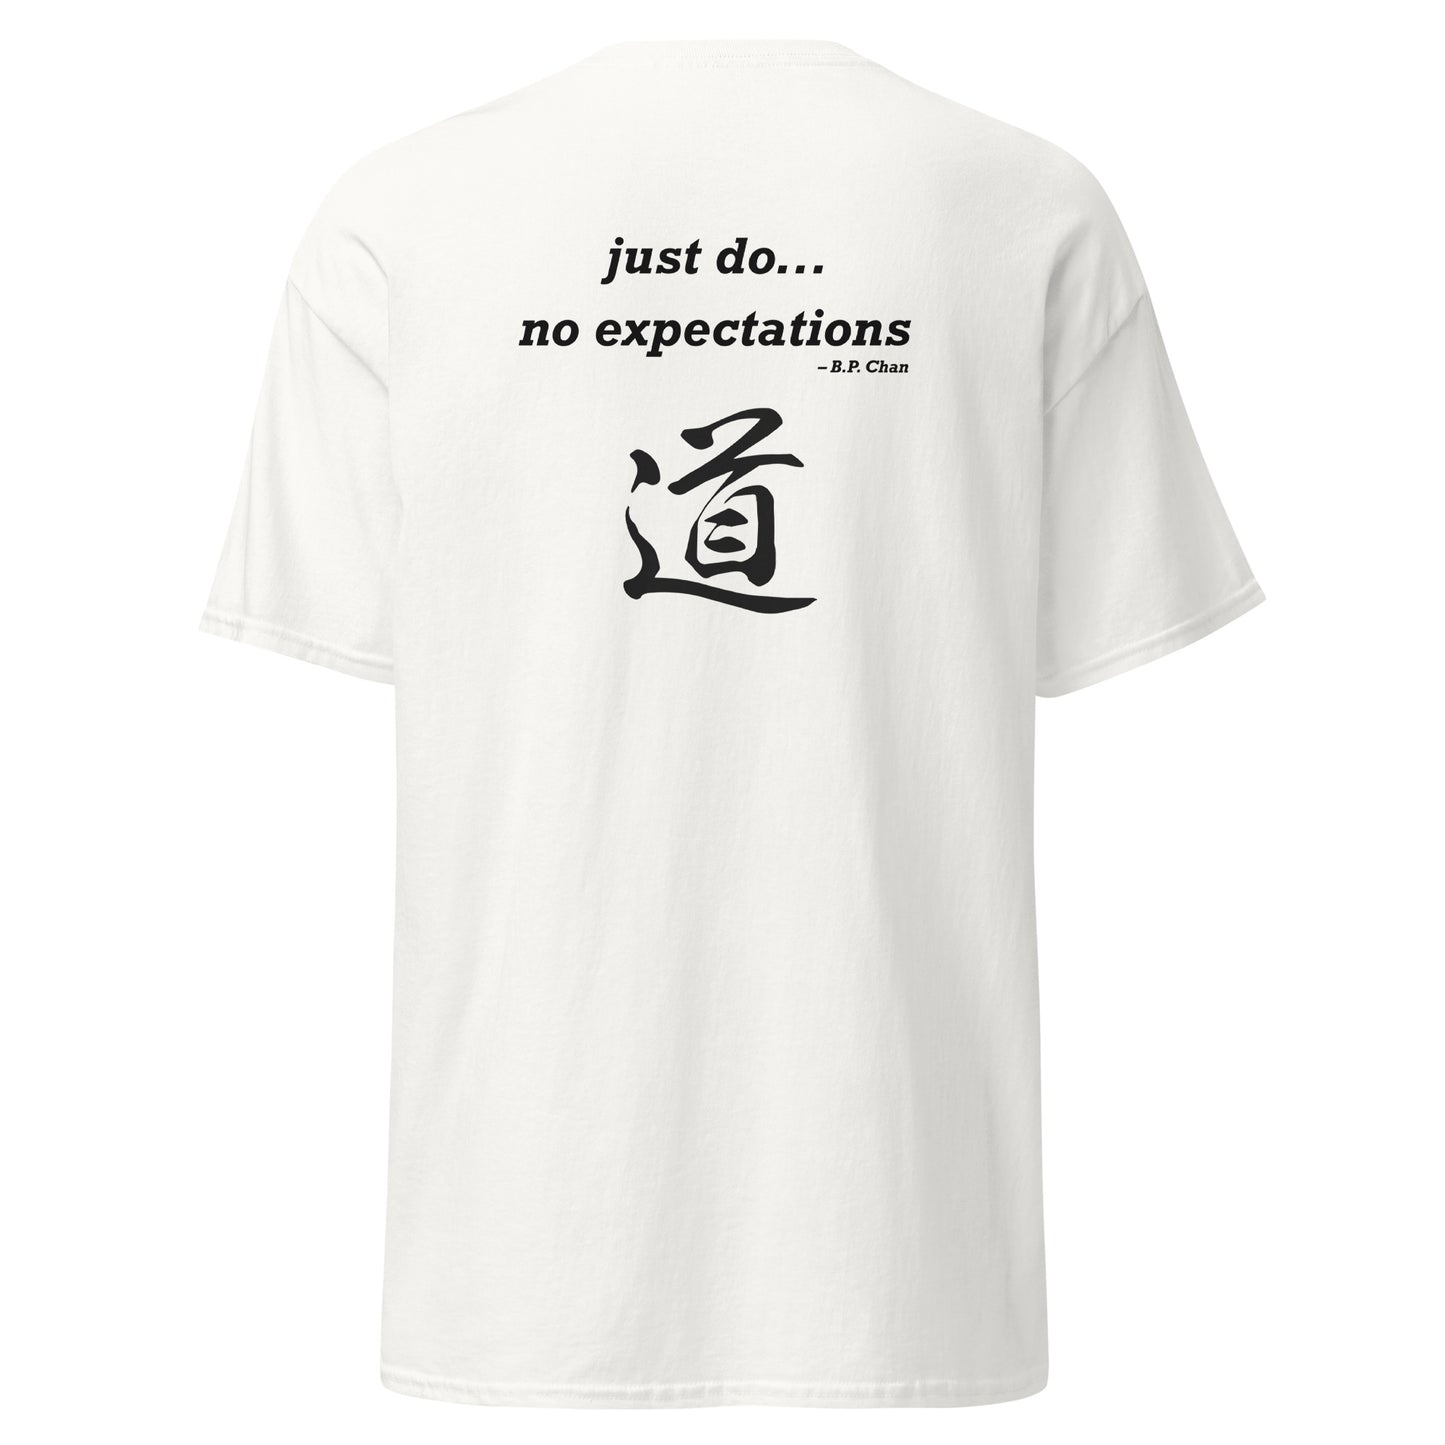 School tee - Just do... no expectations